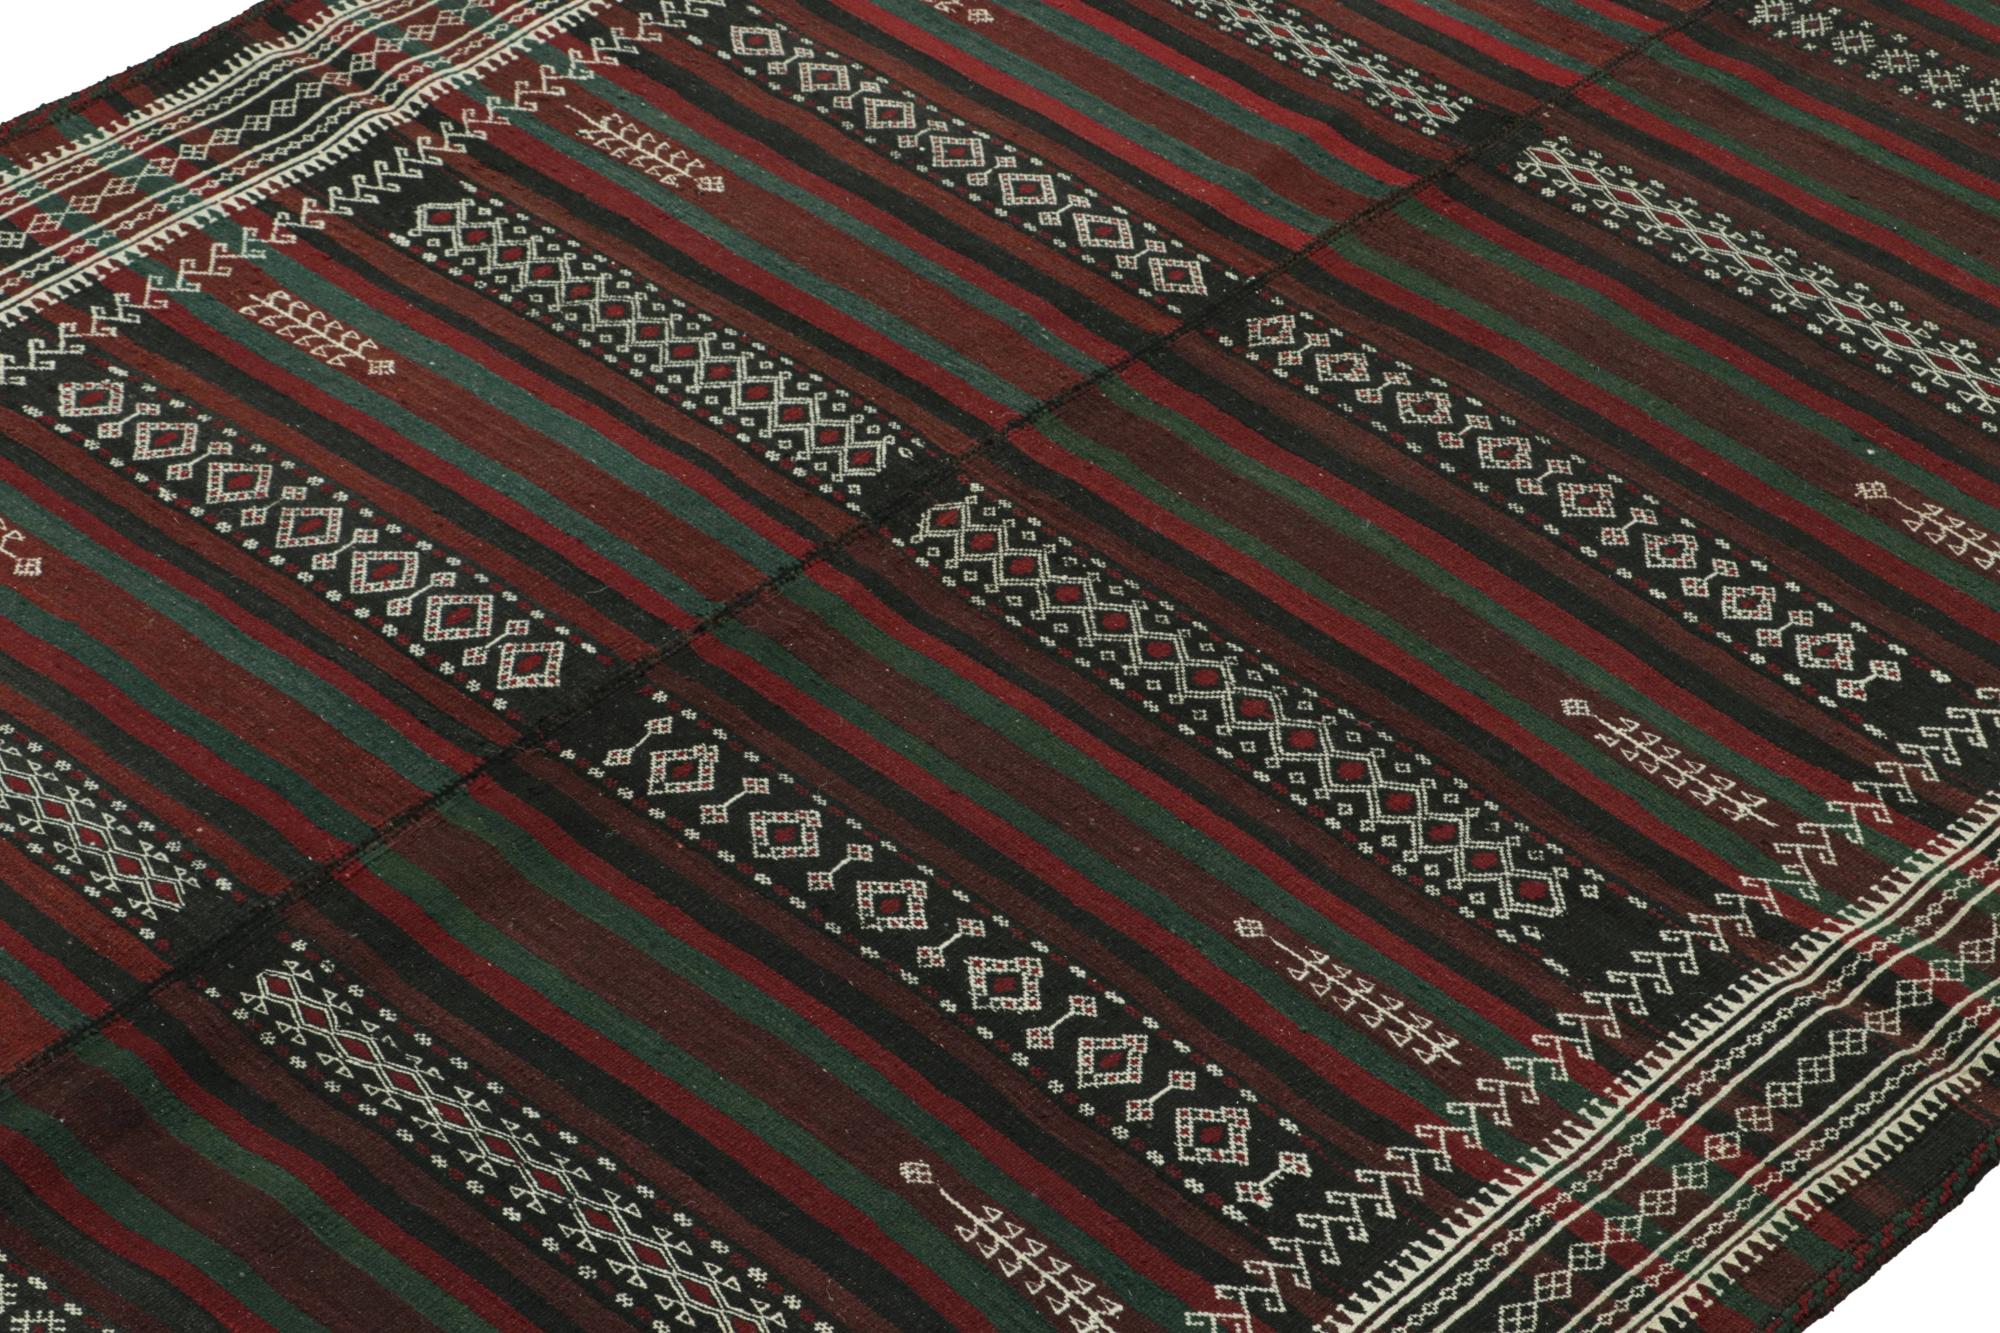 Hand-knotted in wool circa 1950, this 6x10 vintage Persian Kilim is a tribal rug of Baluch provenance.

On the Design: 

This flatweave enjoys stripes and sharp, finely woven geometric patterns in a rich palette of deep brown with red, teal and